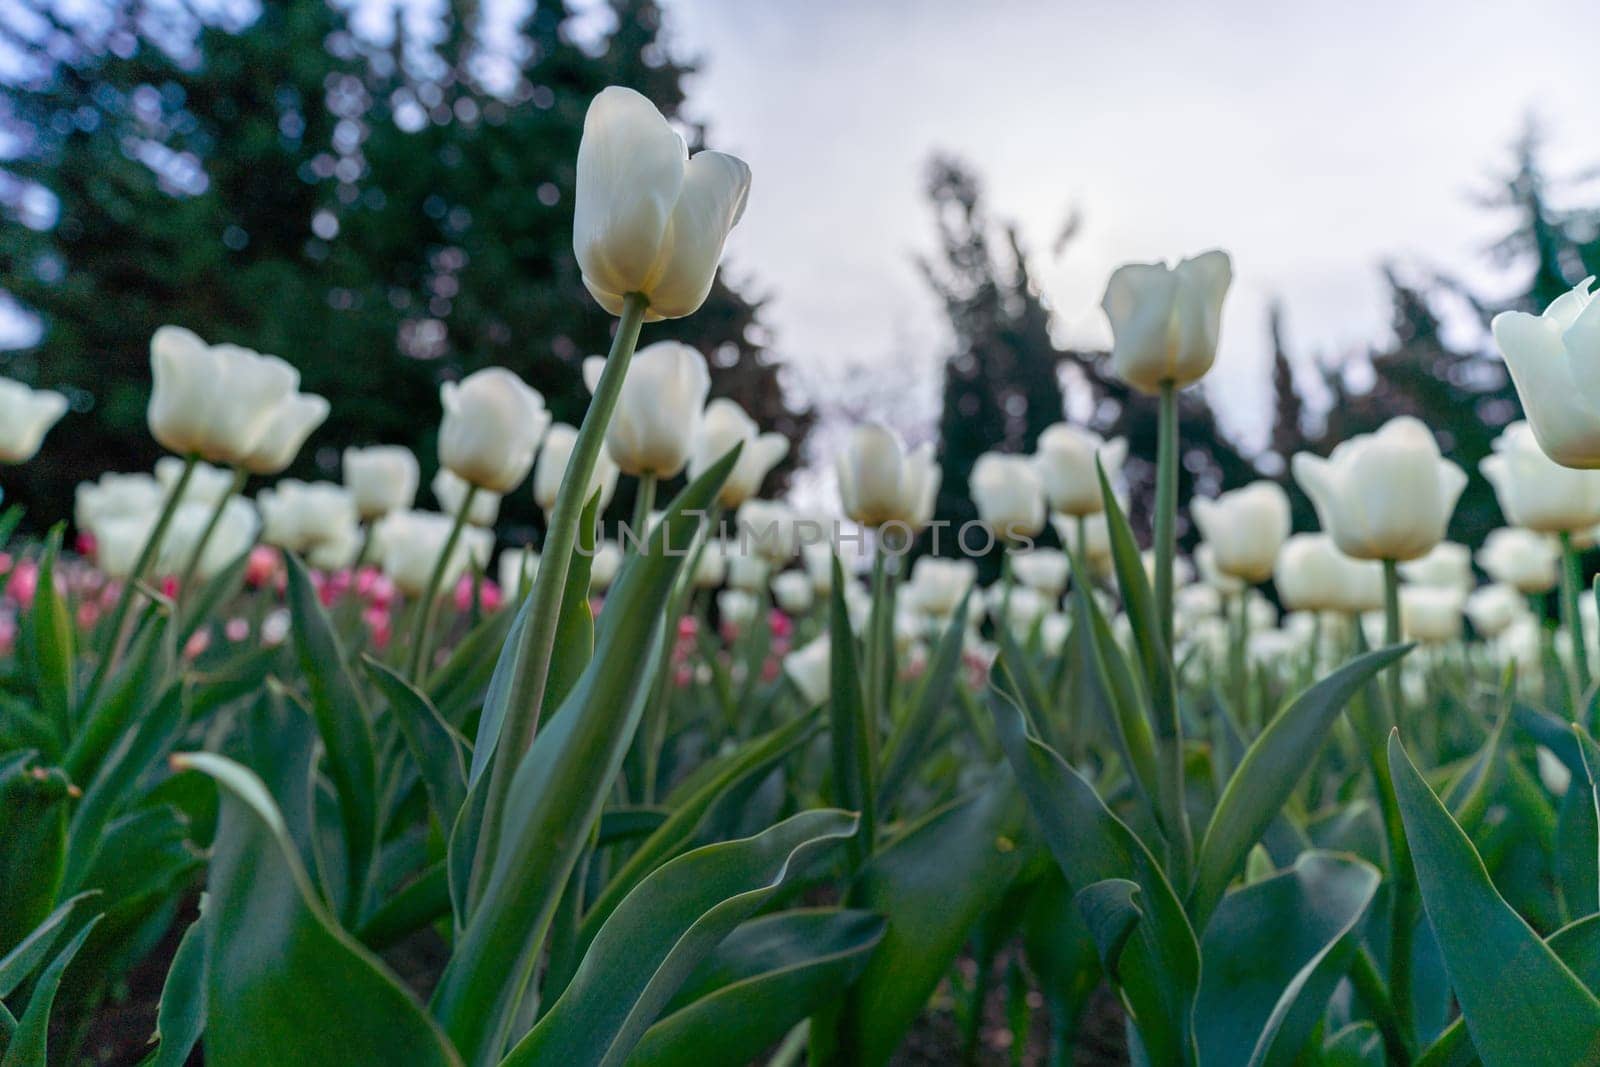 Tulip in a flower bed, white flowers against the sky and trees, spring flowers